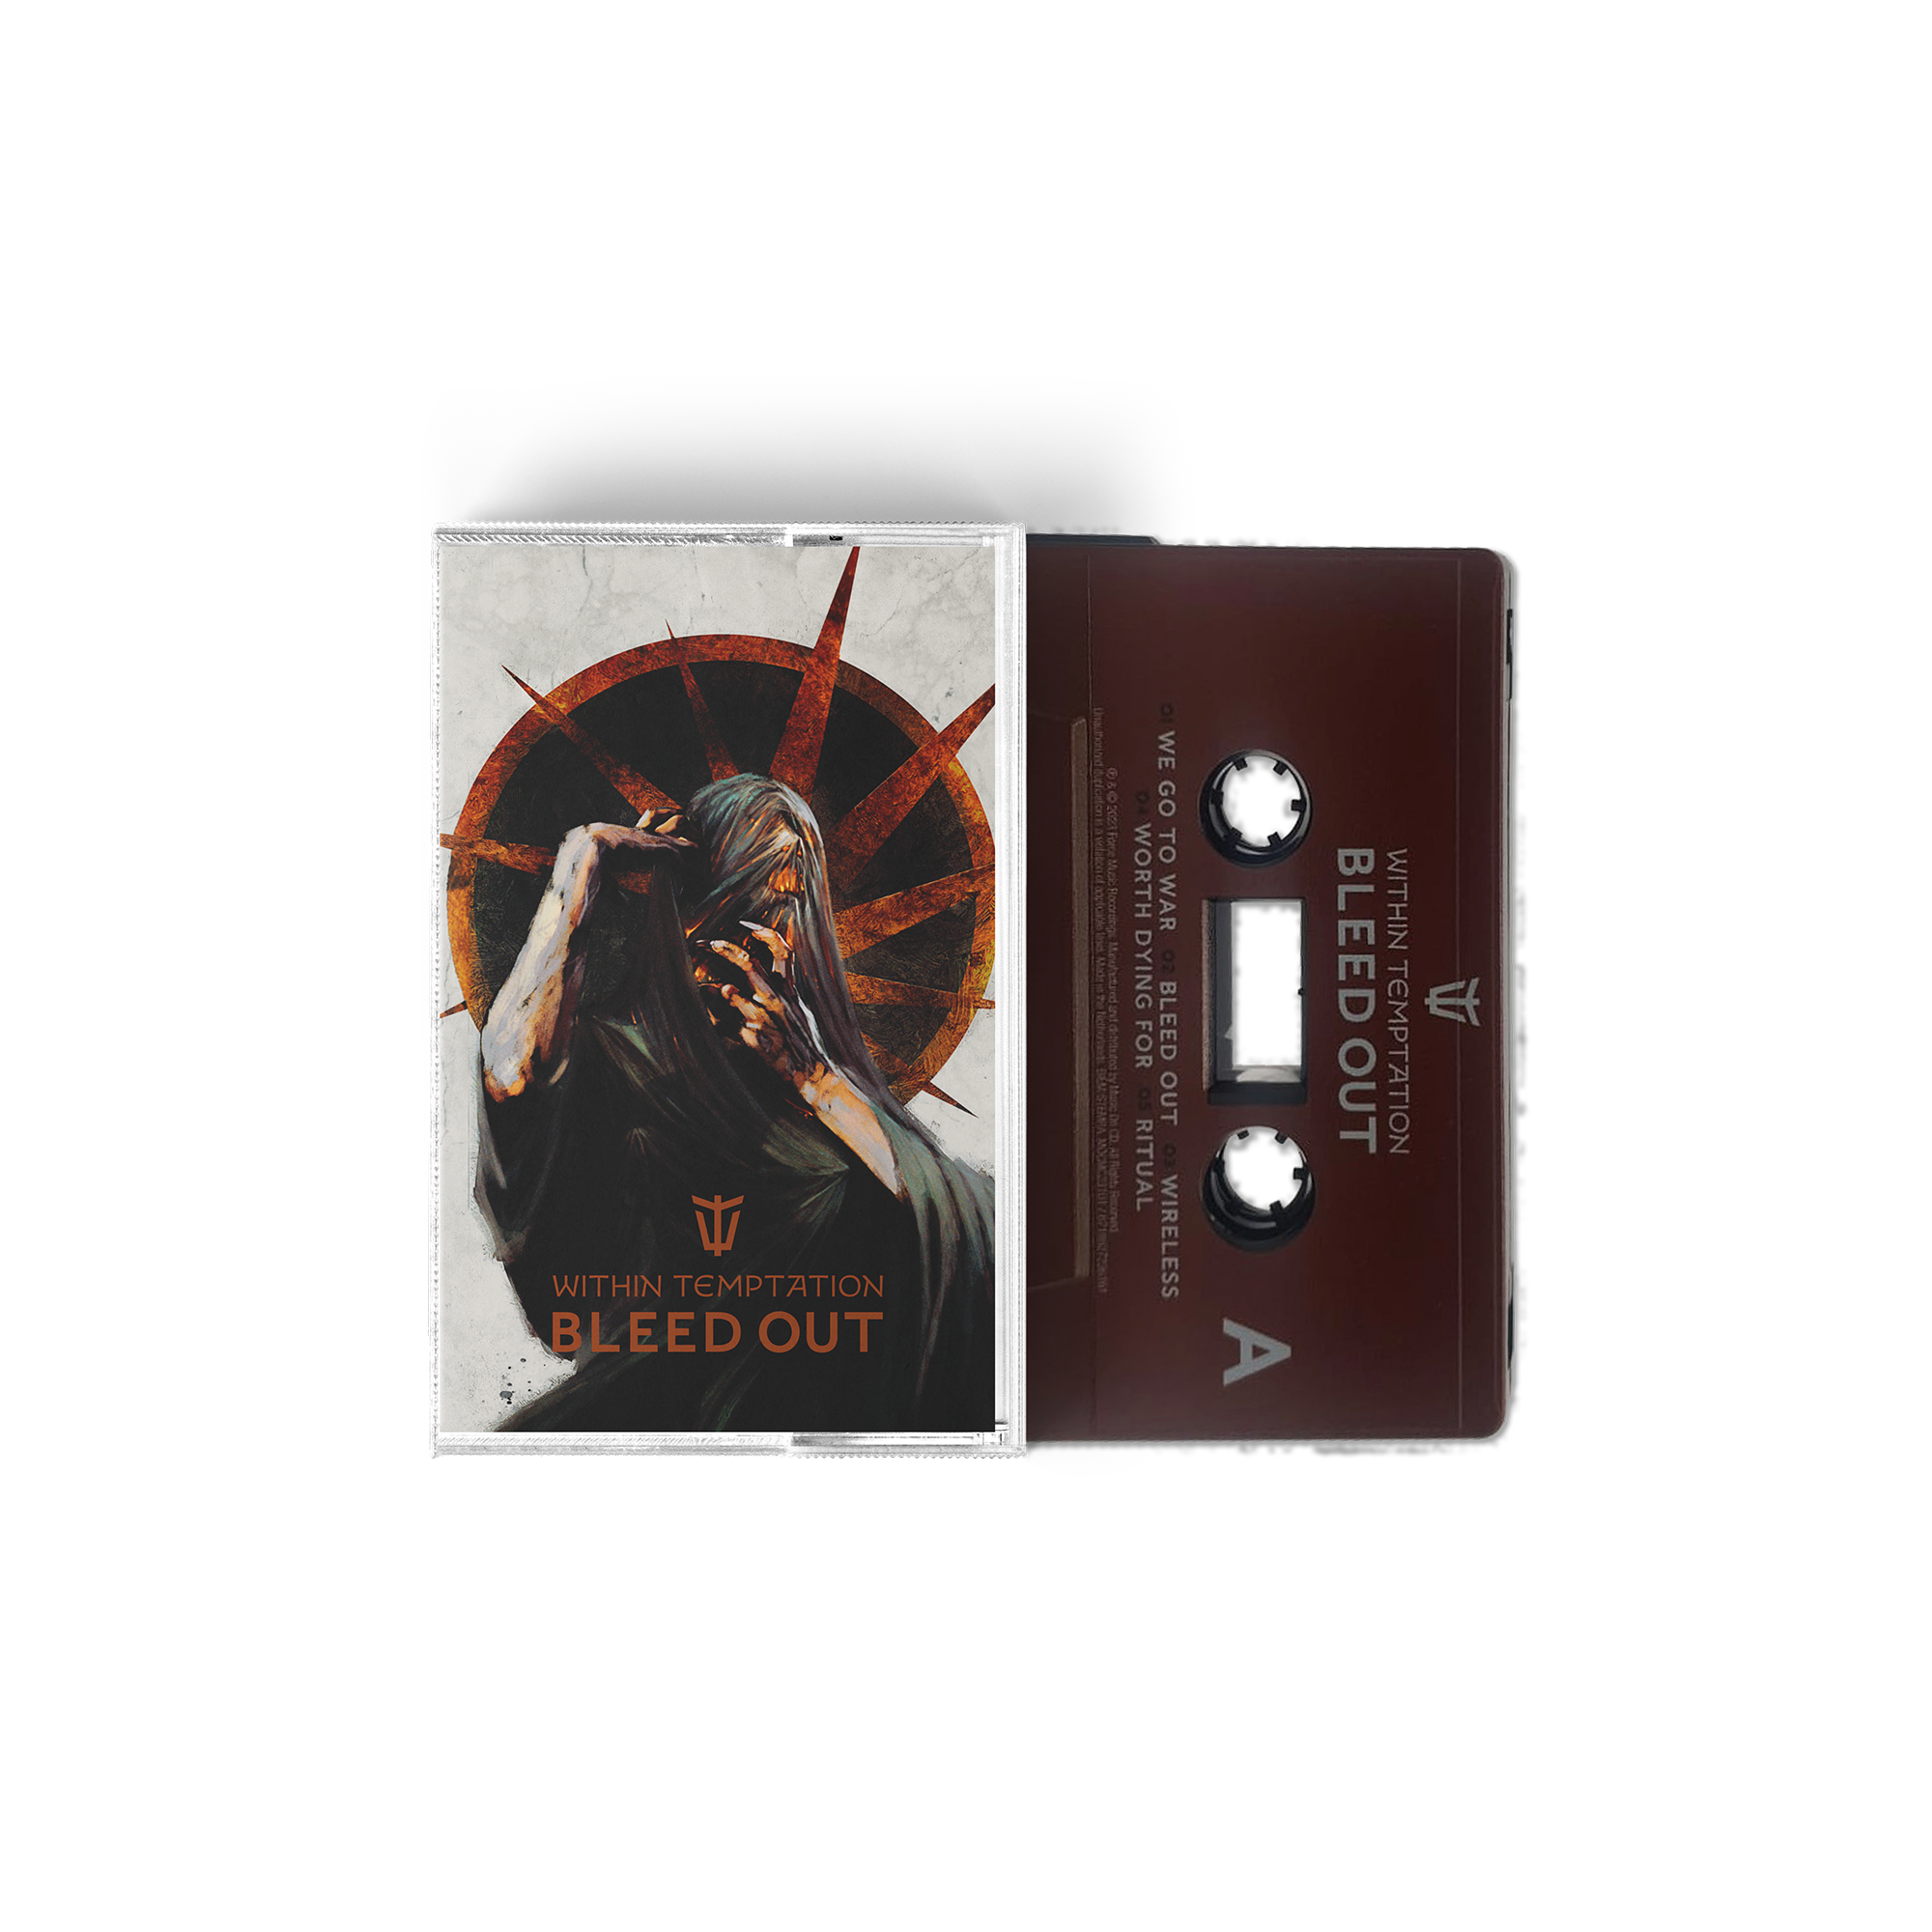 Within　Recordstore　Edition　Limited　Out:　Temptation　Bleed　Cassette　Brown　Shell